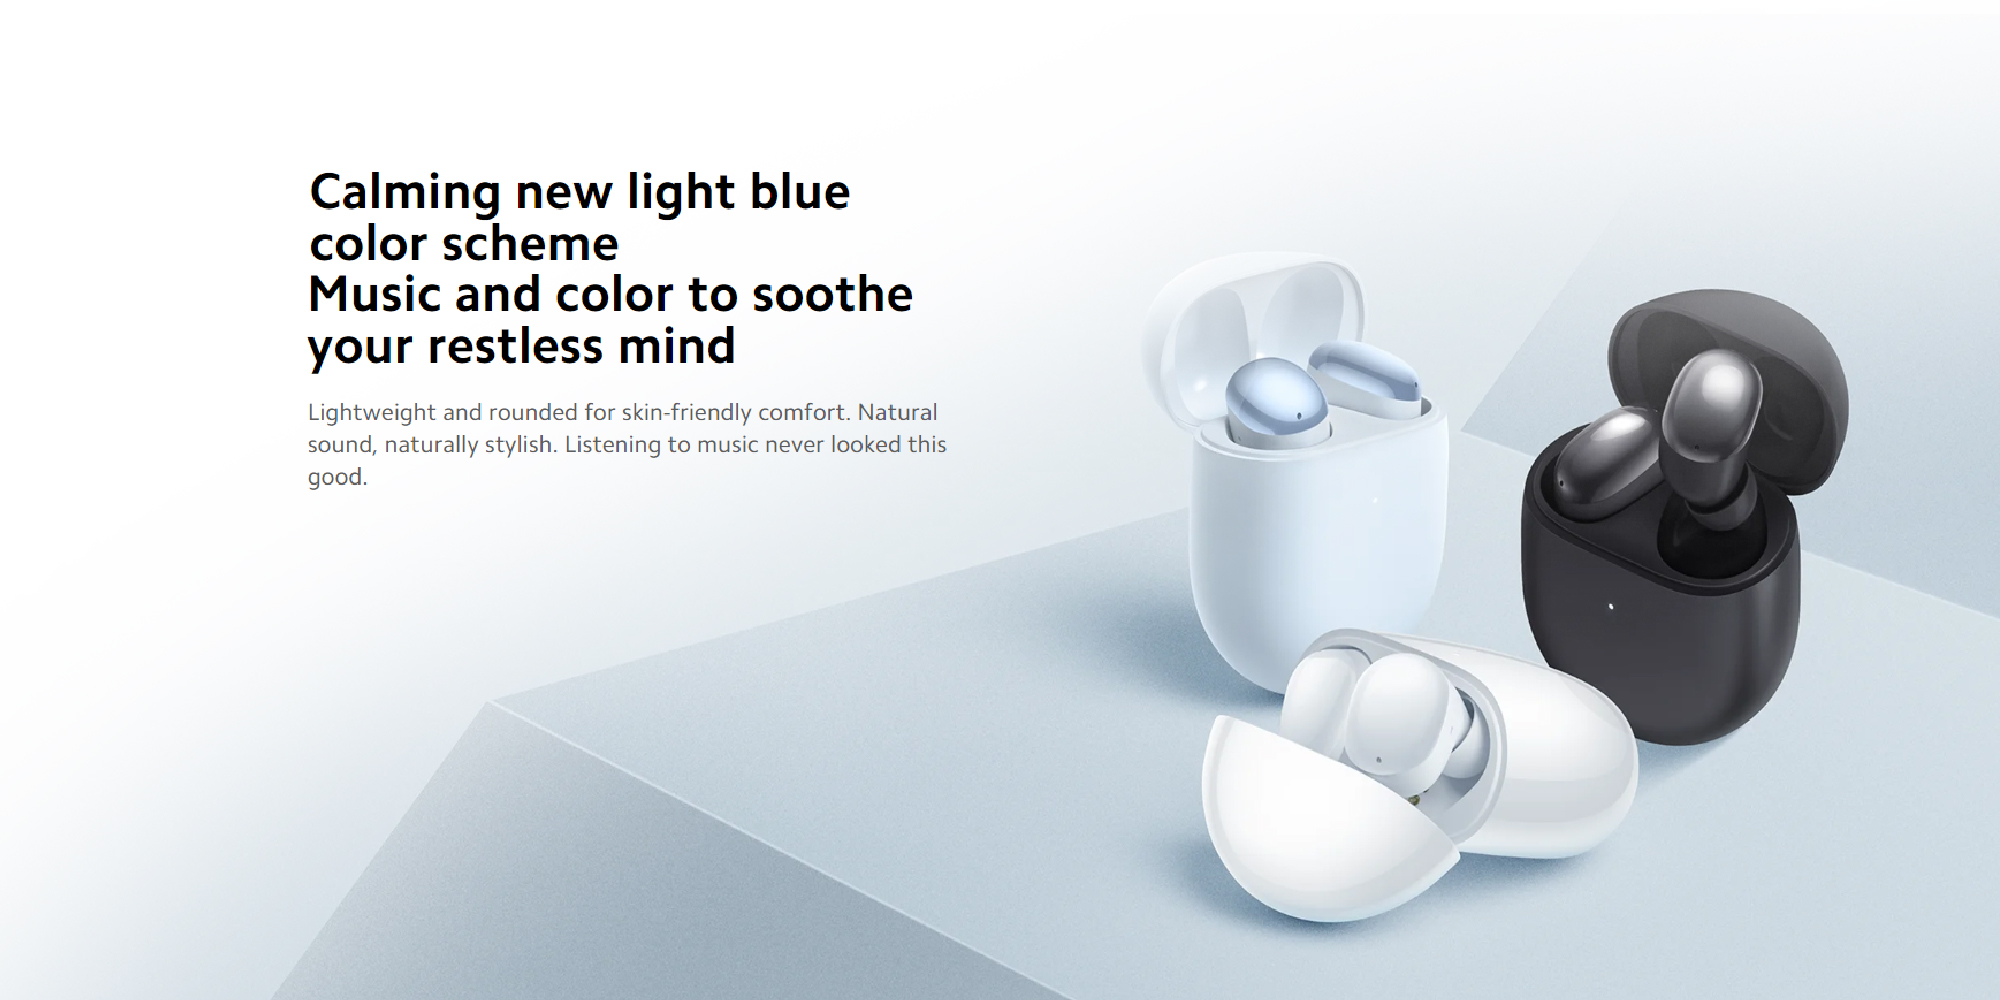 Xiaomi Redmi Buds 4: 35dB Hybrid Active Noise Cancellation, 3 Adaptive ANC Modes, AI Noise Reduction, IP54 Dust and Water Resistance